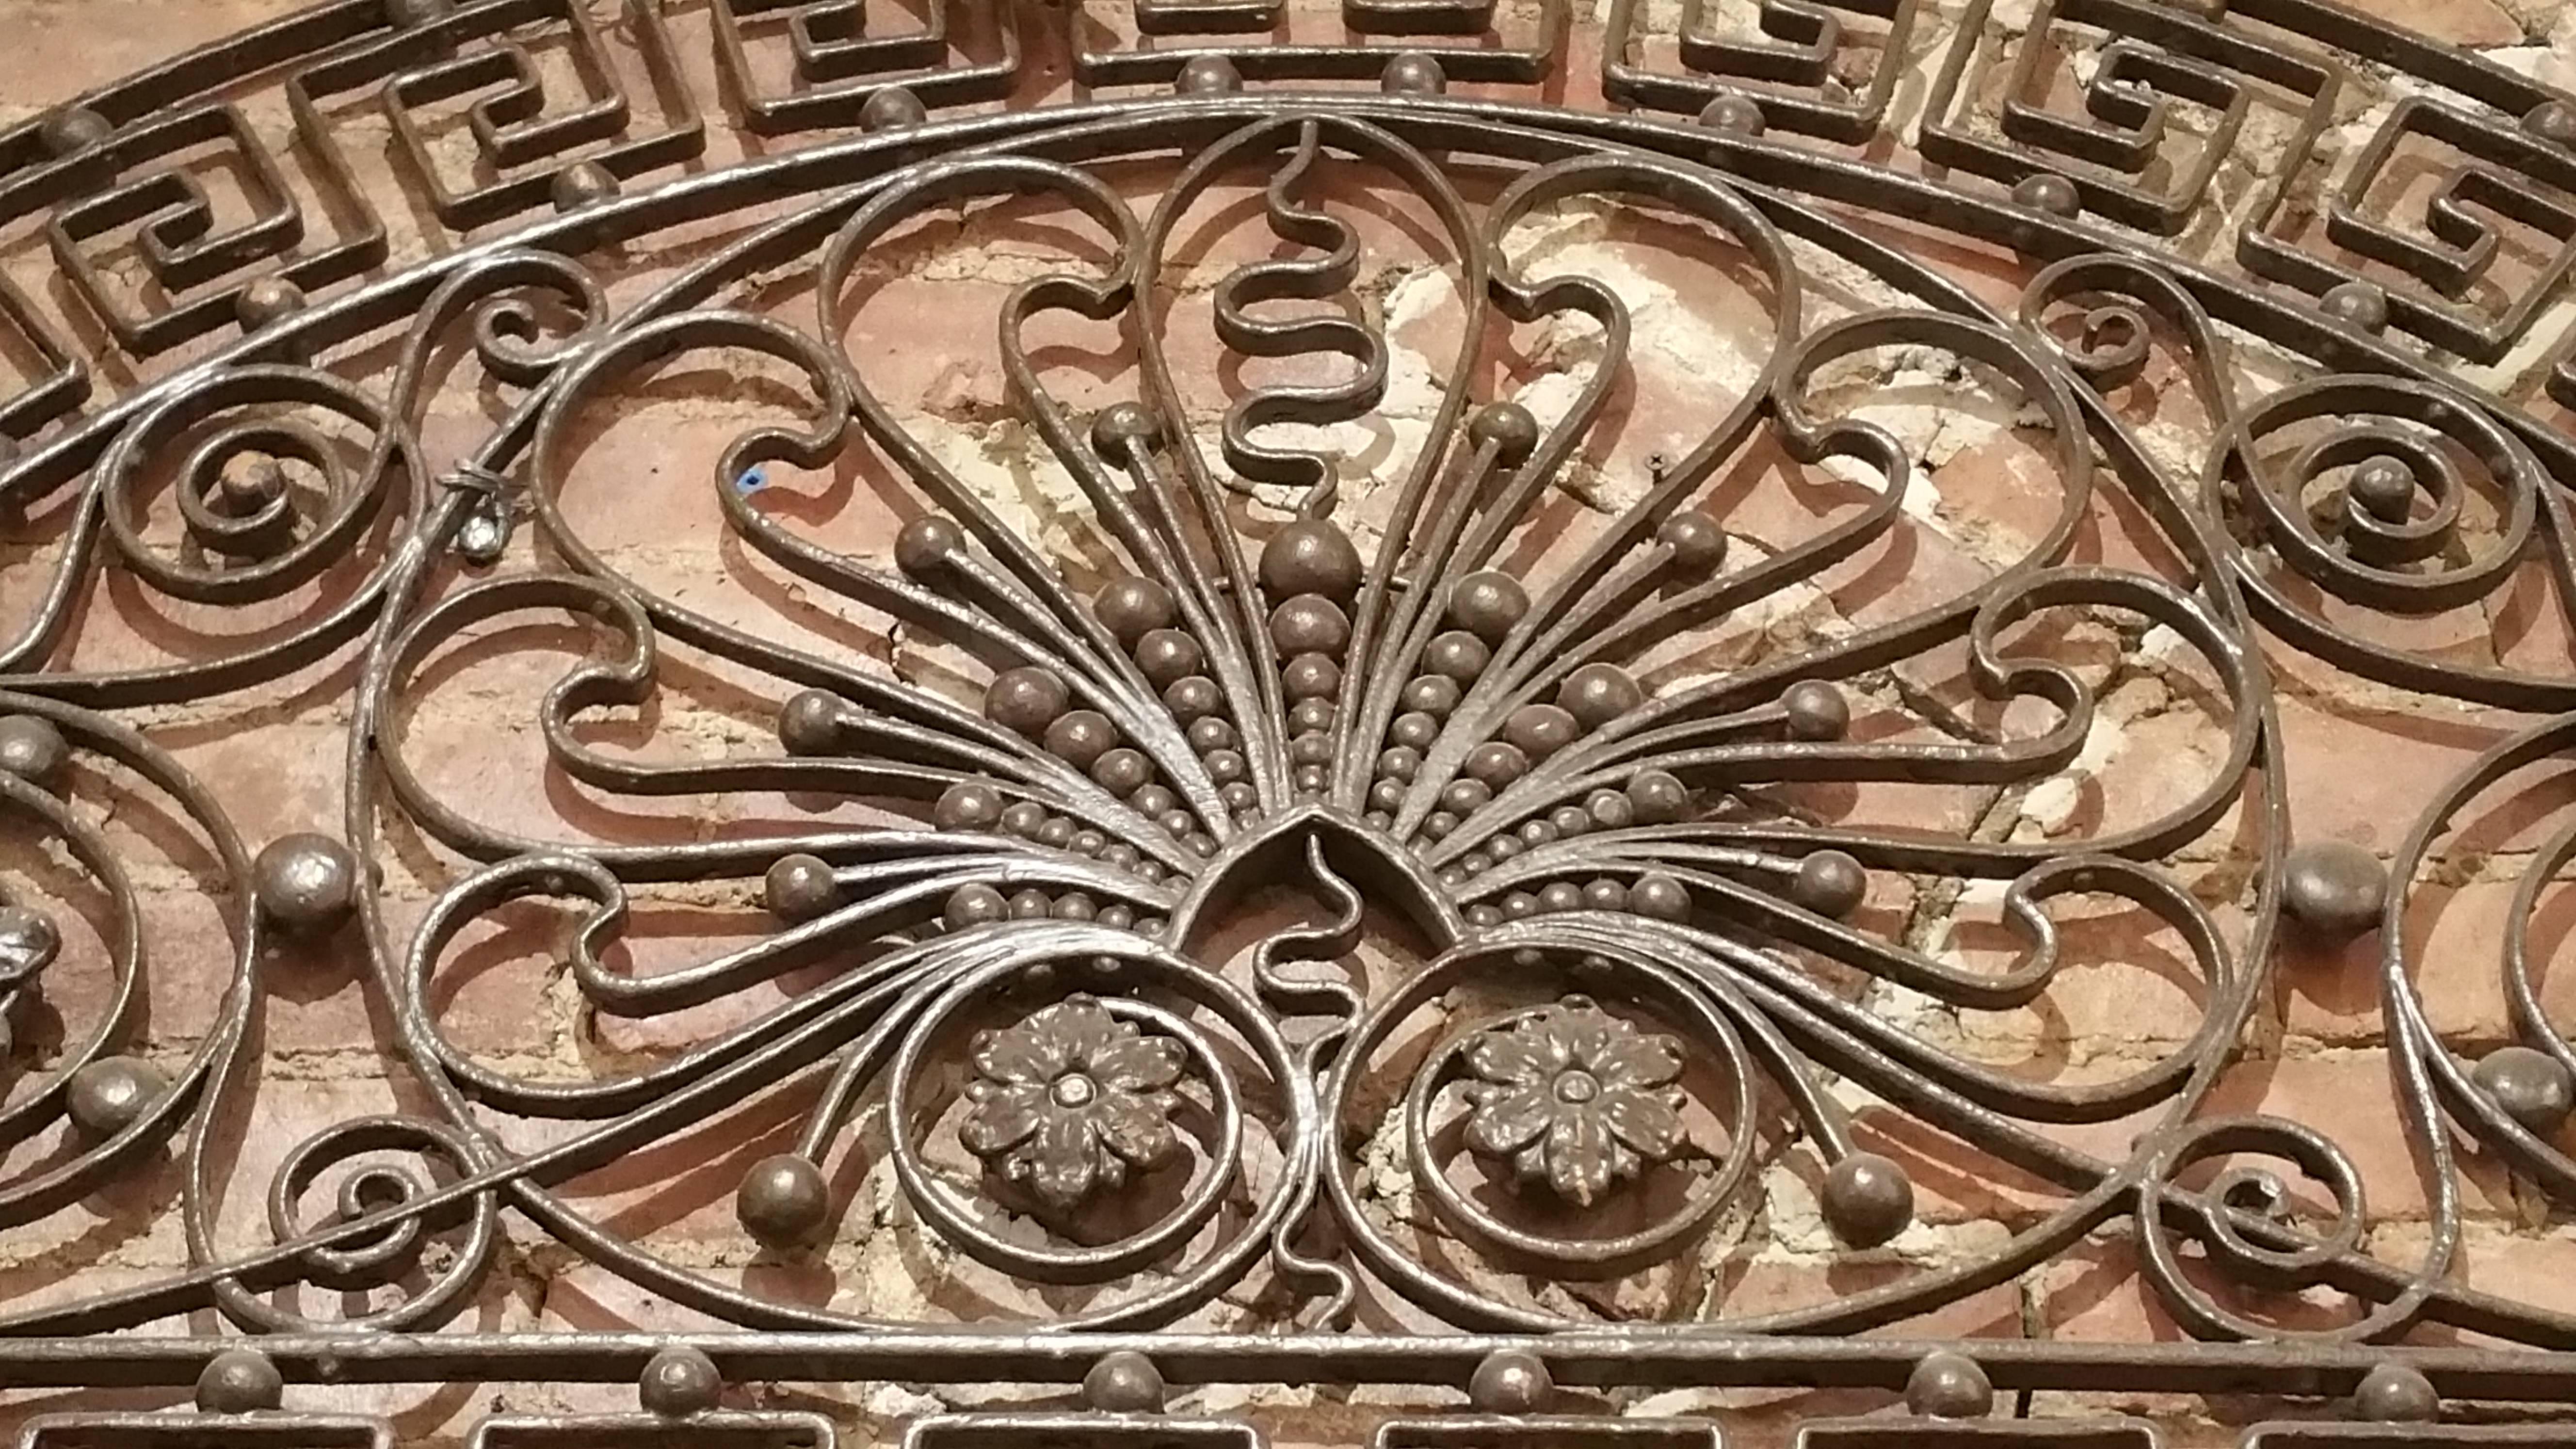 Late 19th Century 1893 Ornate Wrought Iron Grill from the United Charities Building in Manhattan